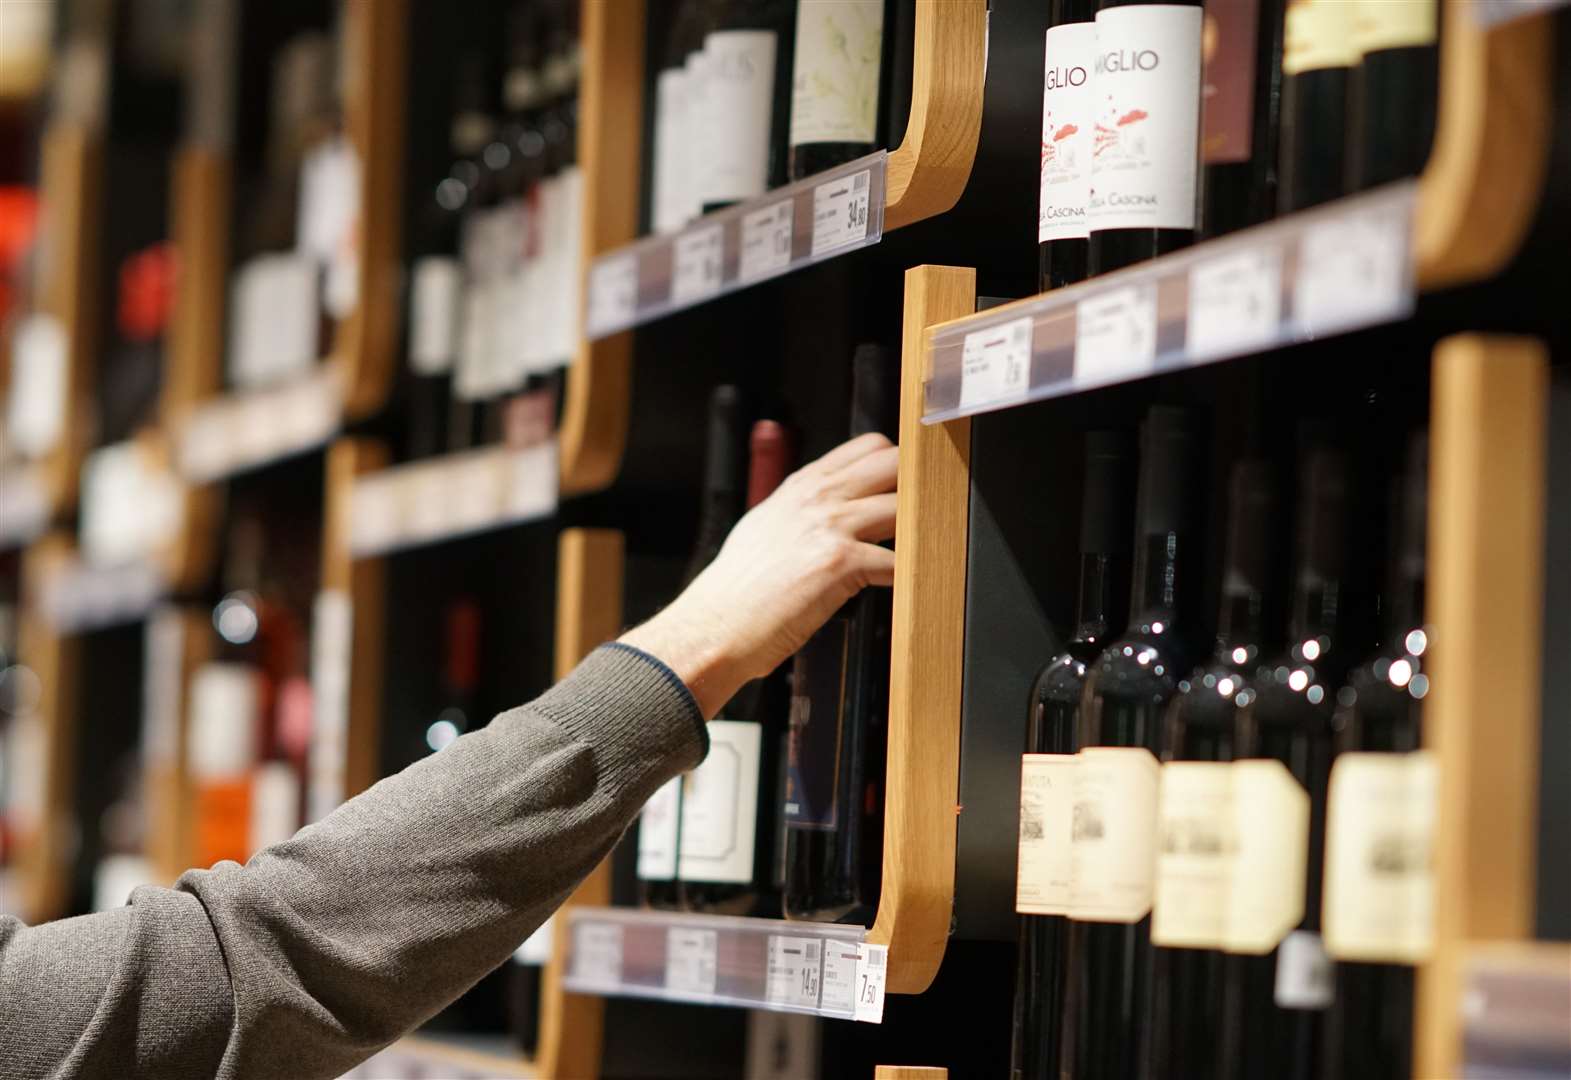 Would raising the minimum unit price of alcohol hit the right target?